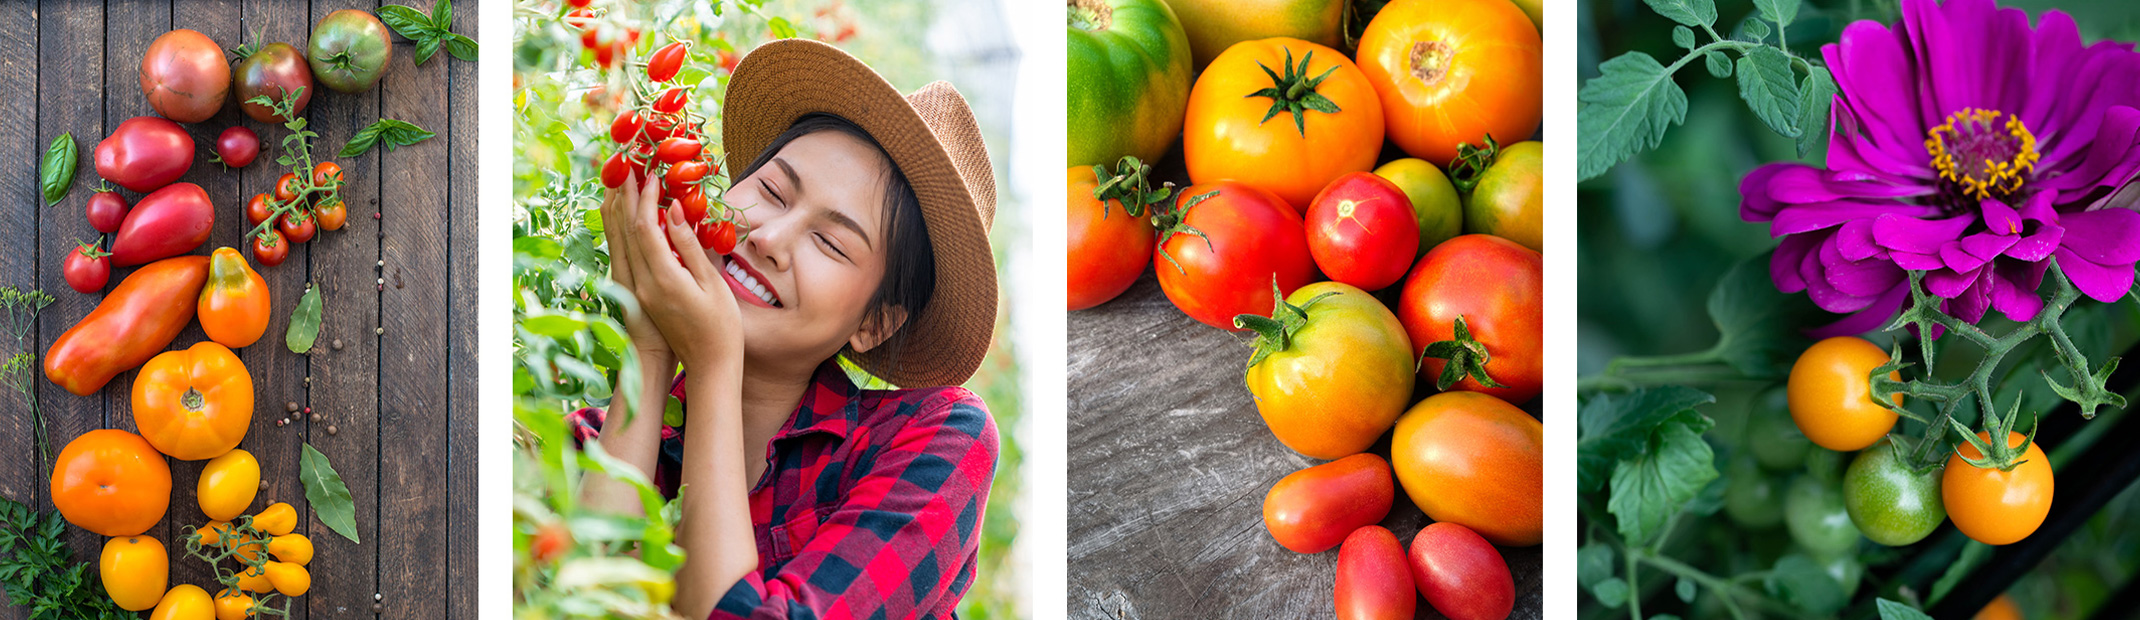 A variety of tomatoes and a woman smiling while holding tomatoes on the vine.